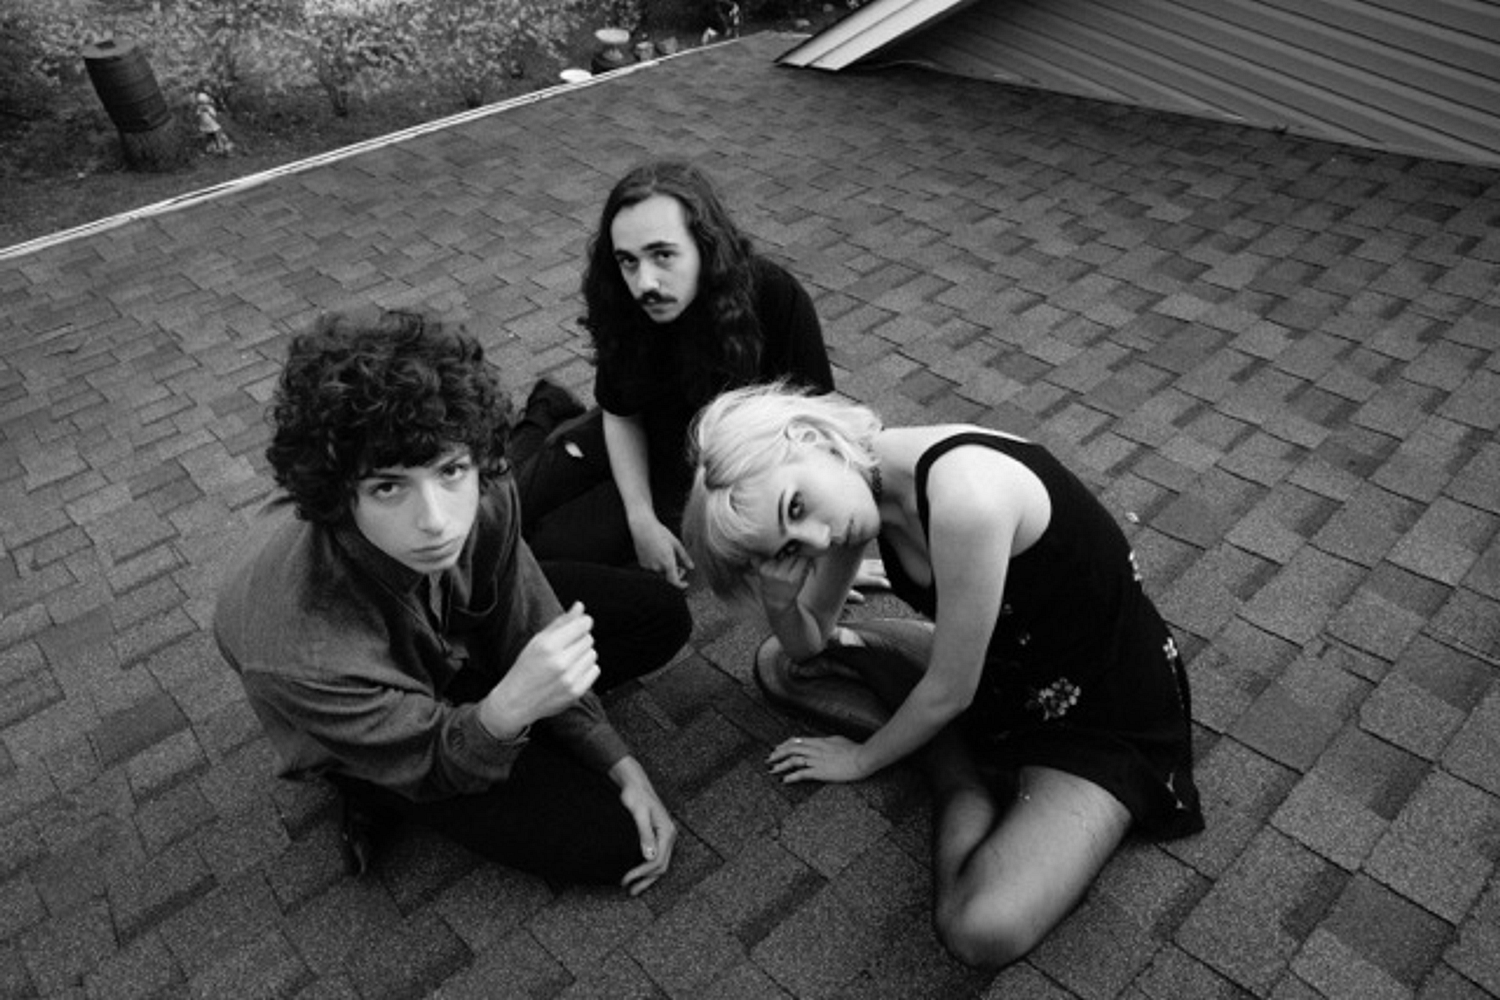 Sunflower Bean: "Let the next generation have a hero"